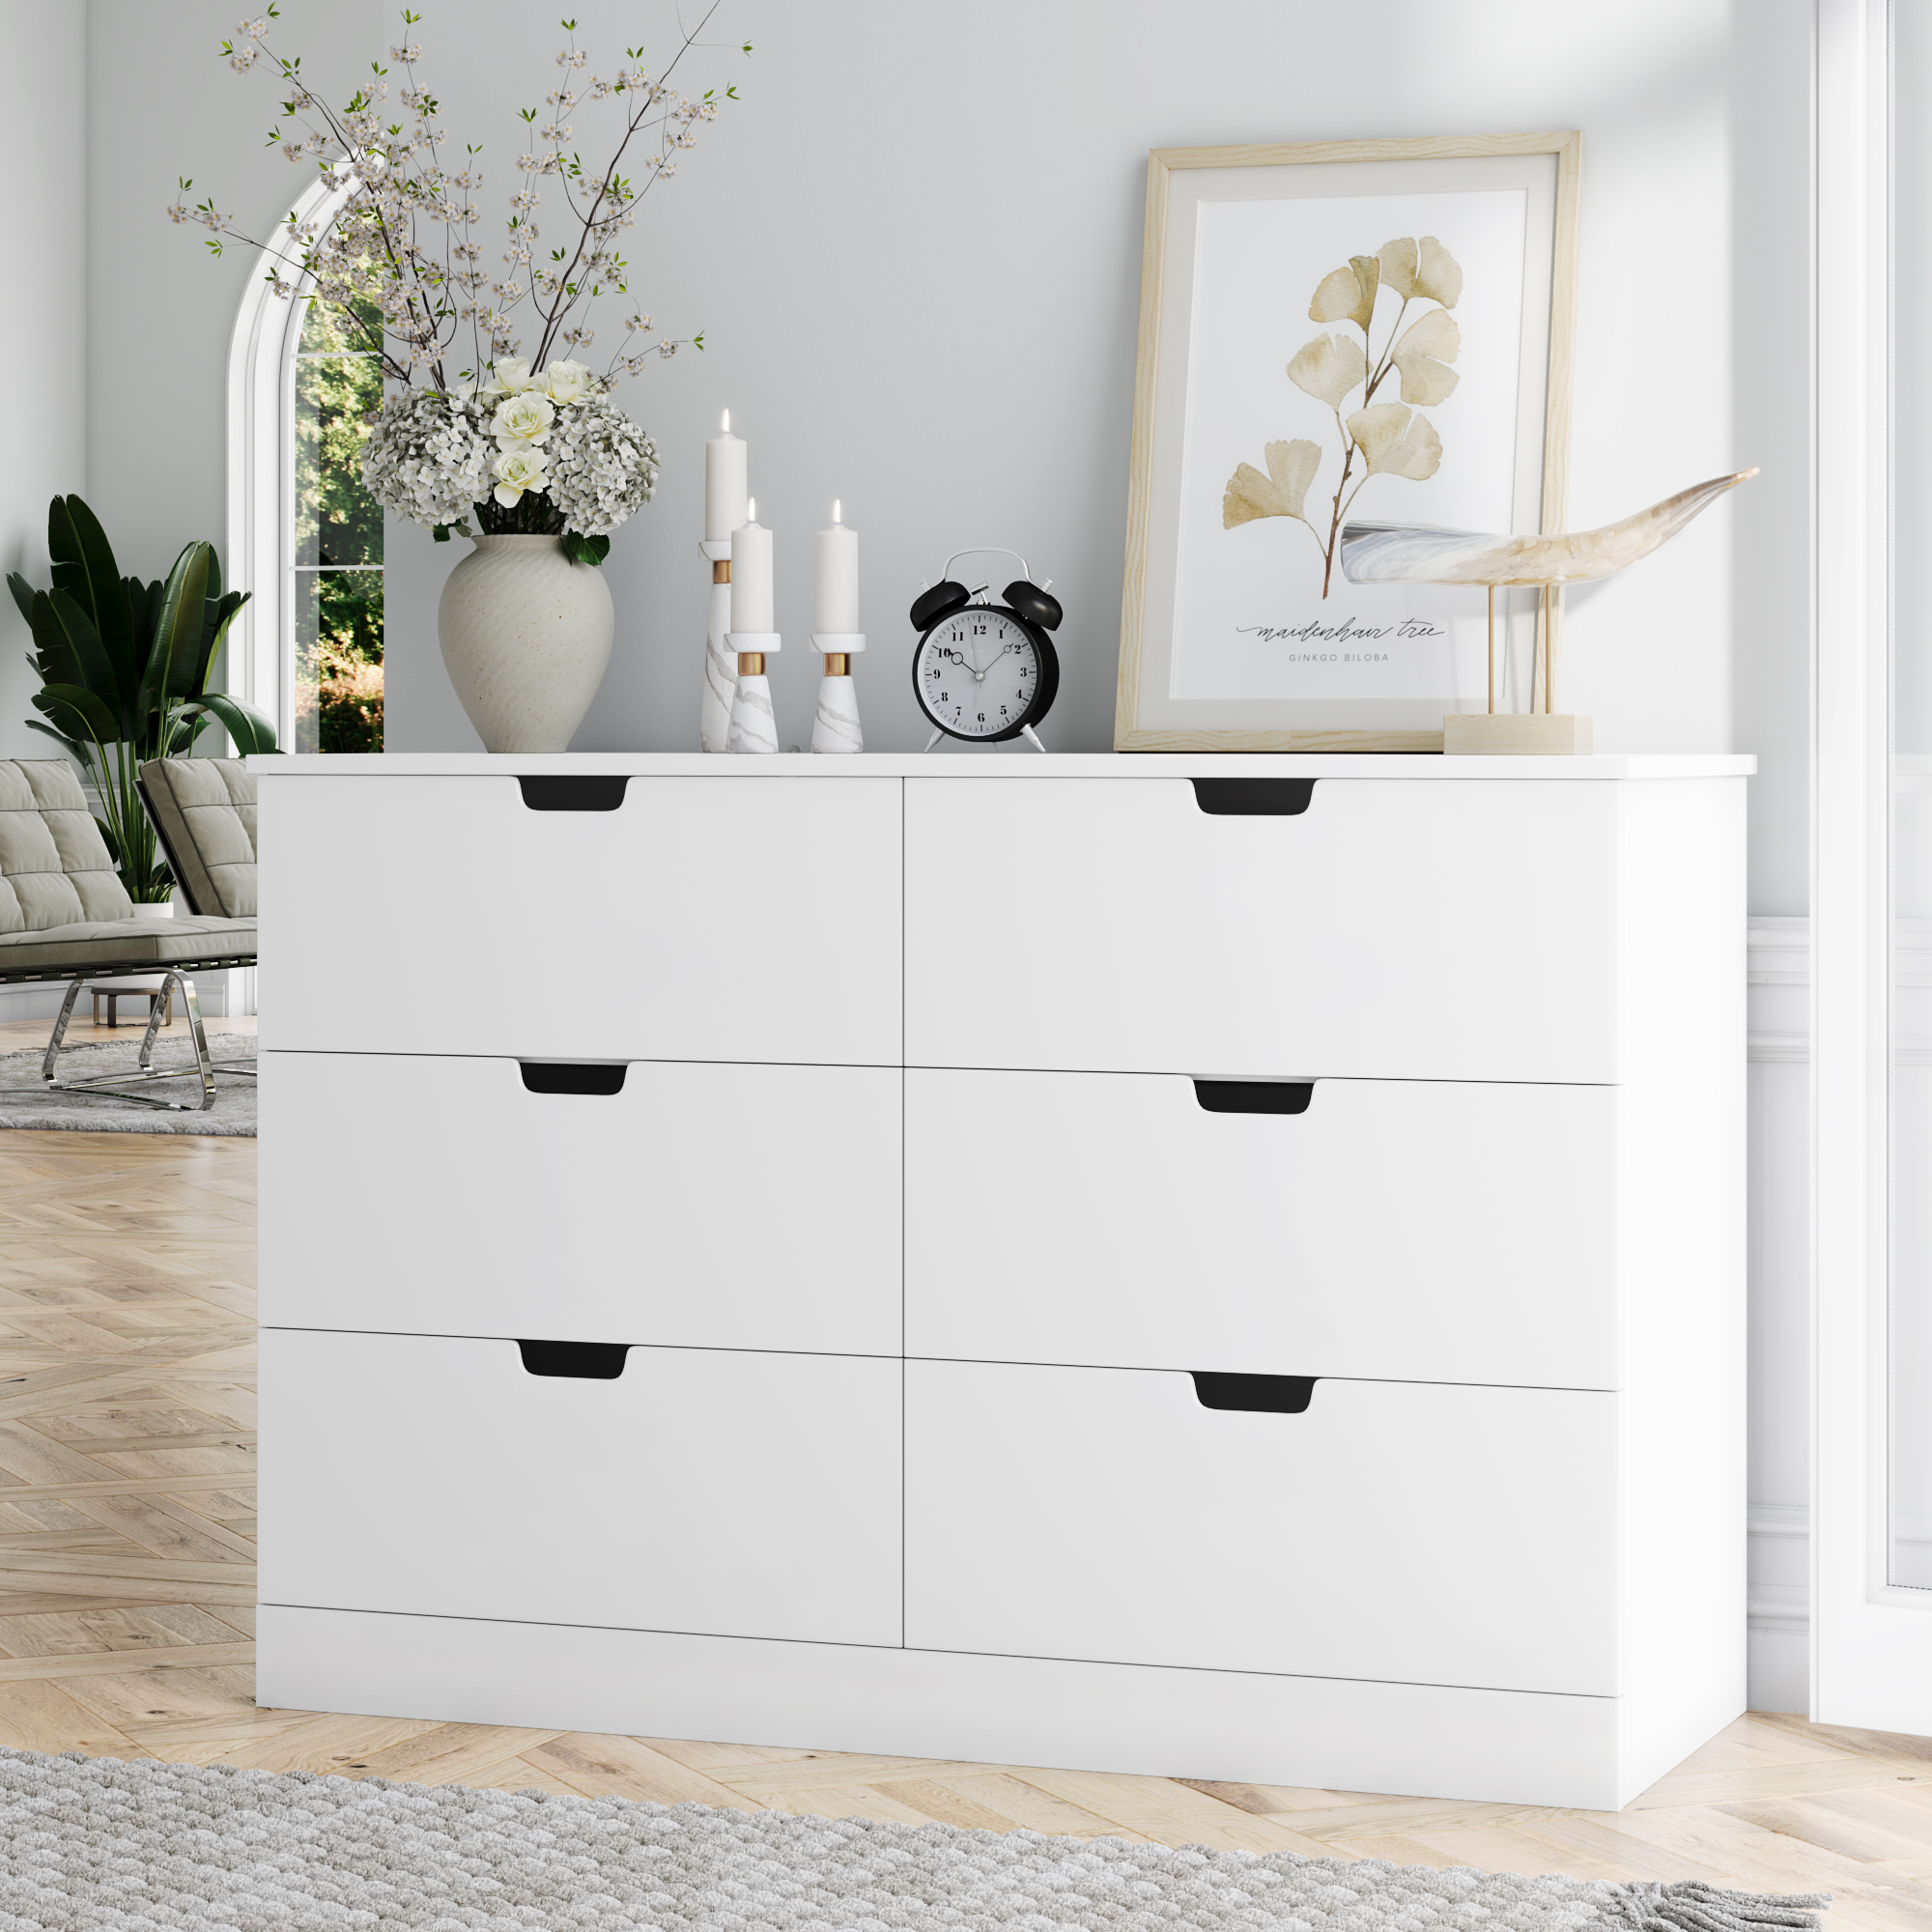 Homfa 6 Drawer Double Dresser for Bedroom, Modern White Chest, Wood Storage Cabinet for Living Room - image 1 of 10